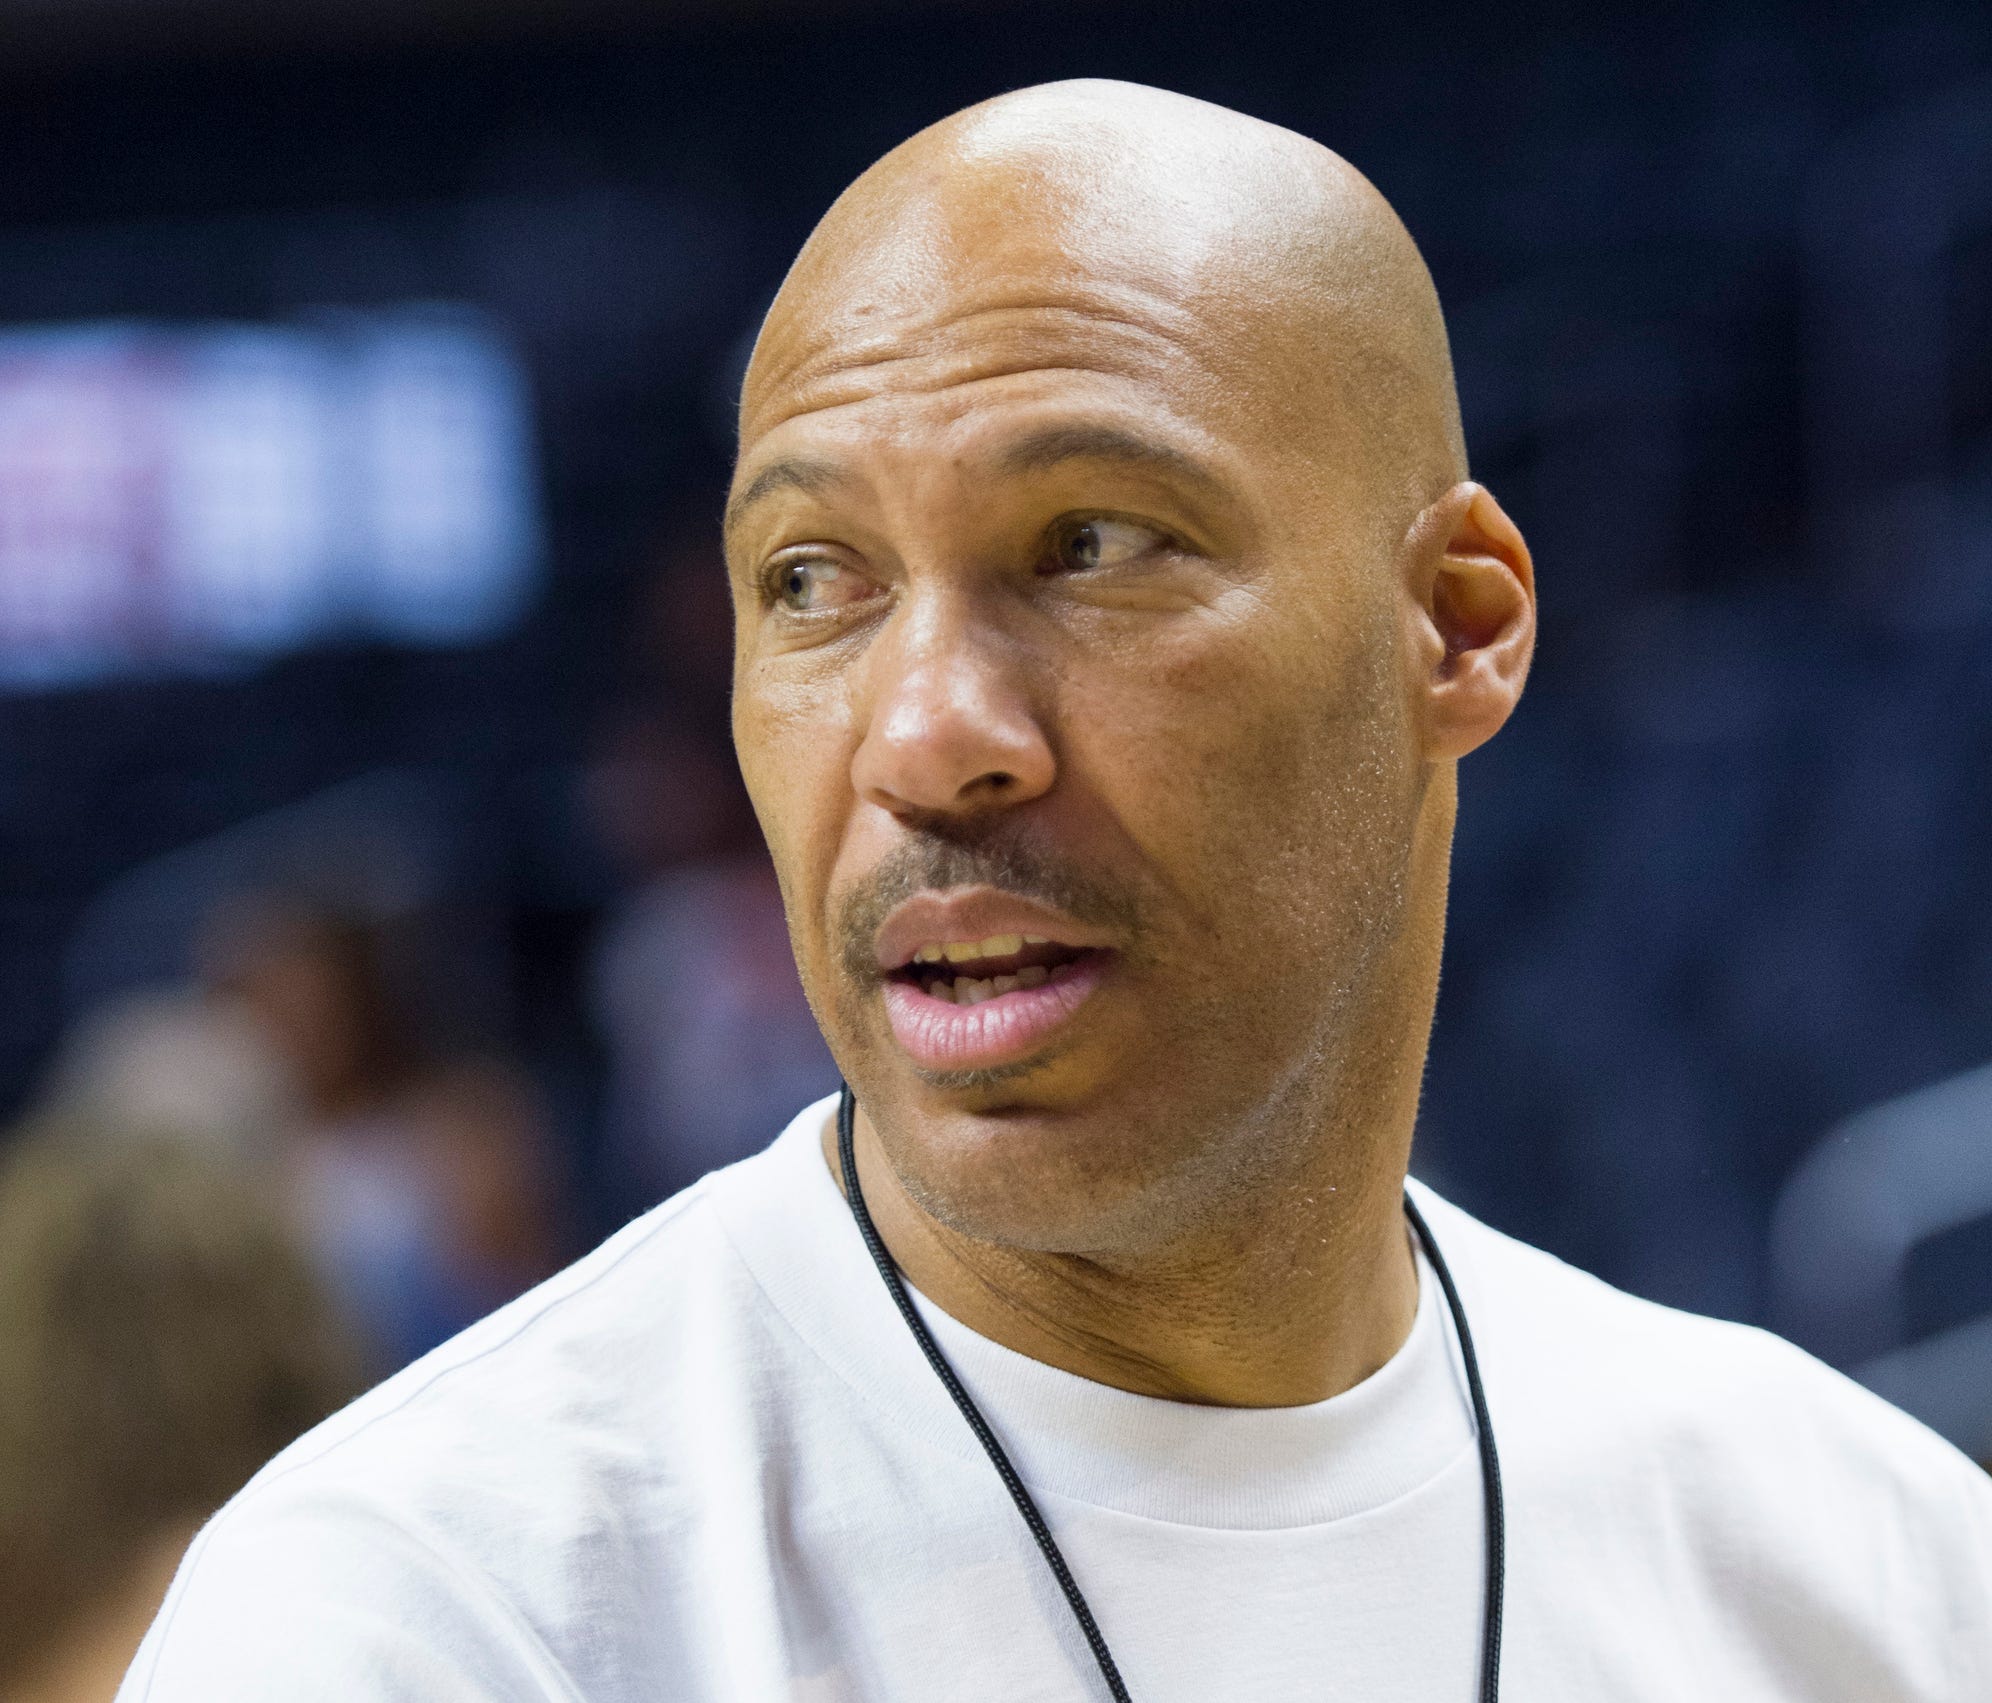 Lavar Ball and President Trump have engaged in a war of words on Twitter.